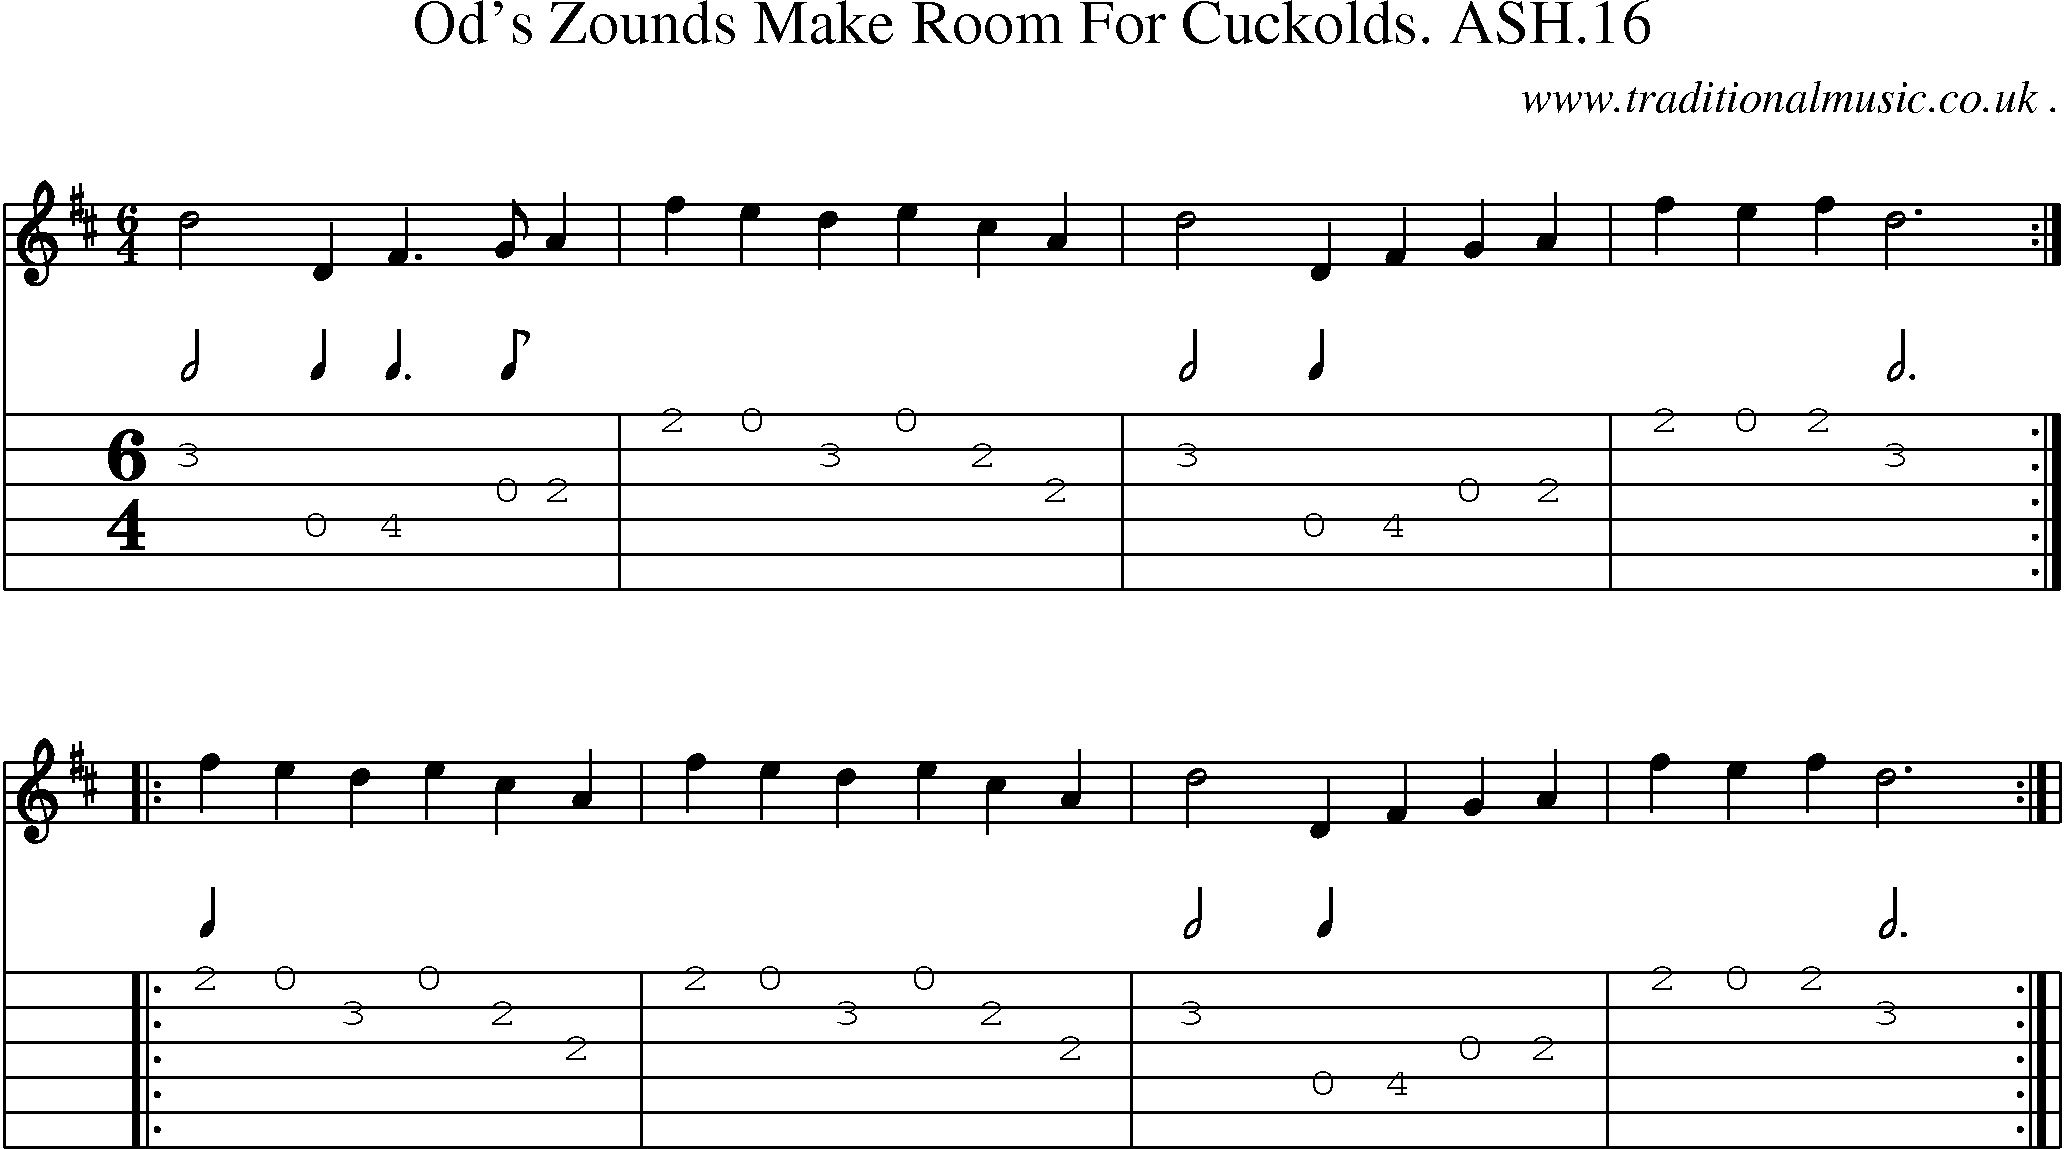 Sheet-Music and Guitar Tabs for Ods Zounds Make Room For Cuckolds Ash16